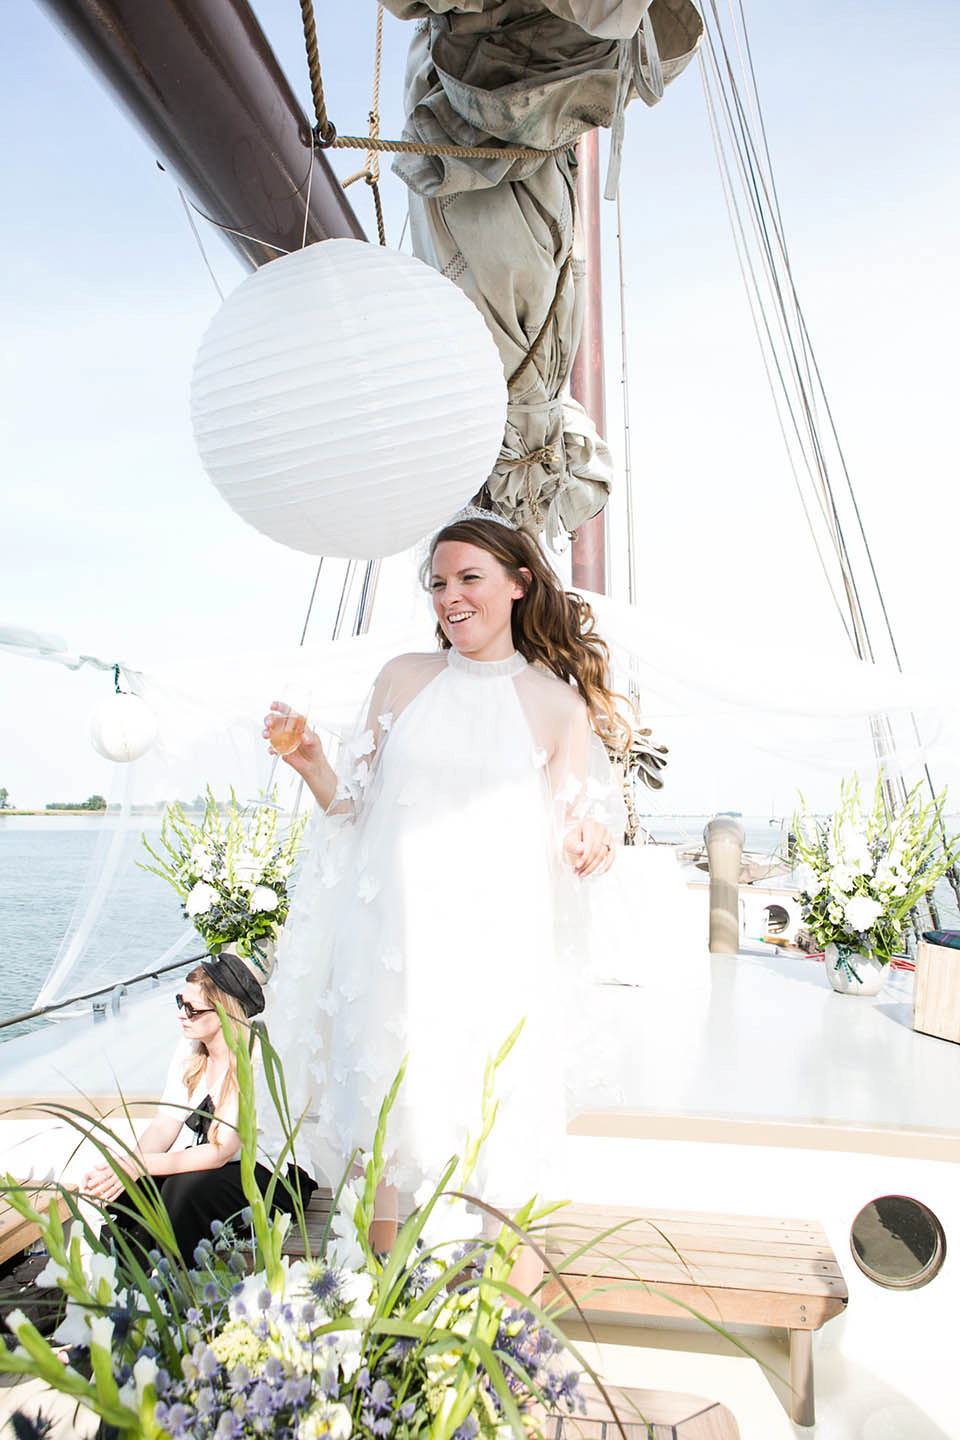 A Kaviar Gauche Butterfly Gown for a Boat Wedding in Amsterdam, photogrpahy by Taran Wilkhu.